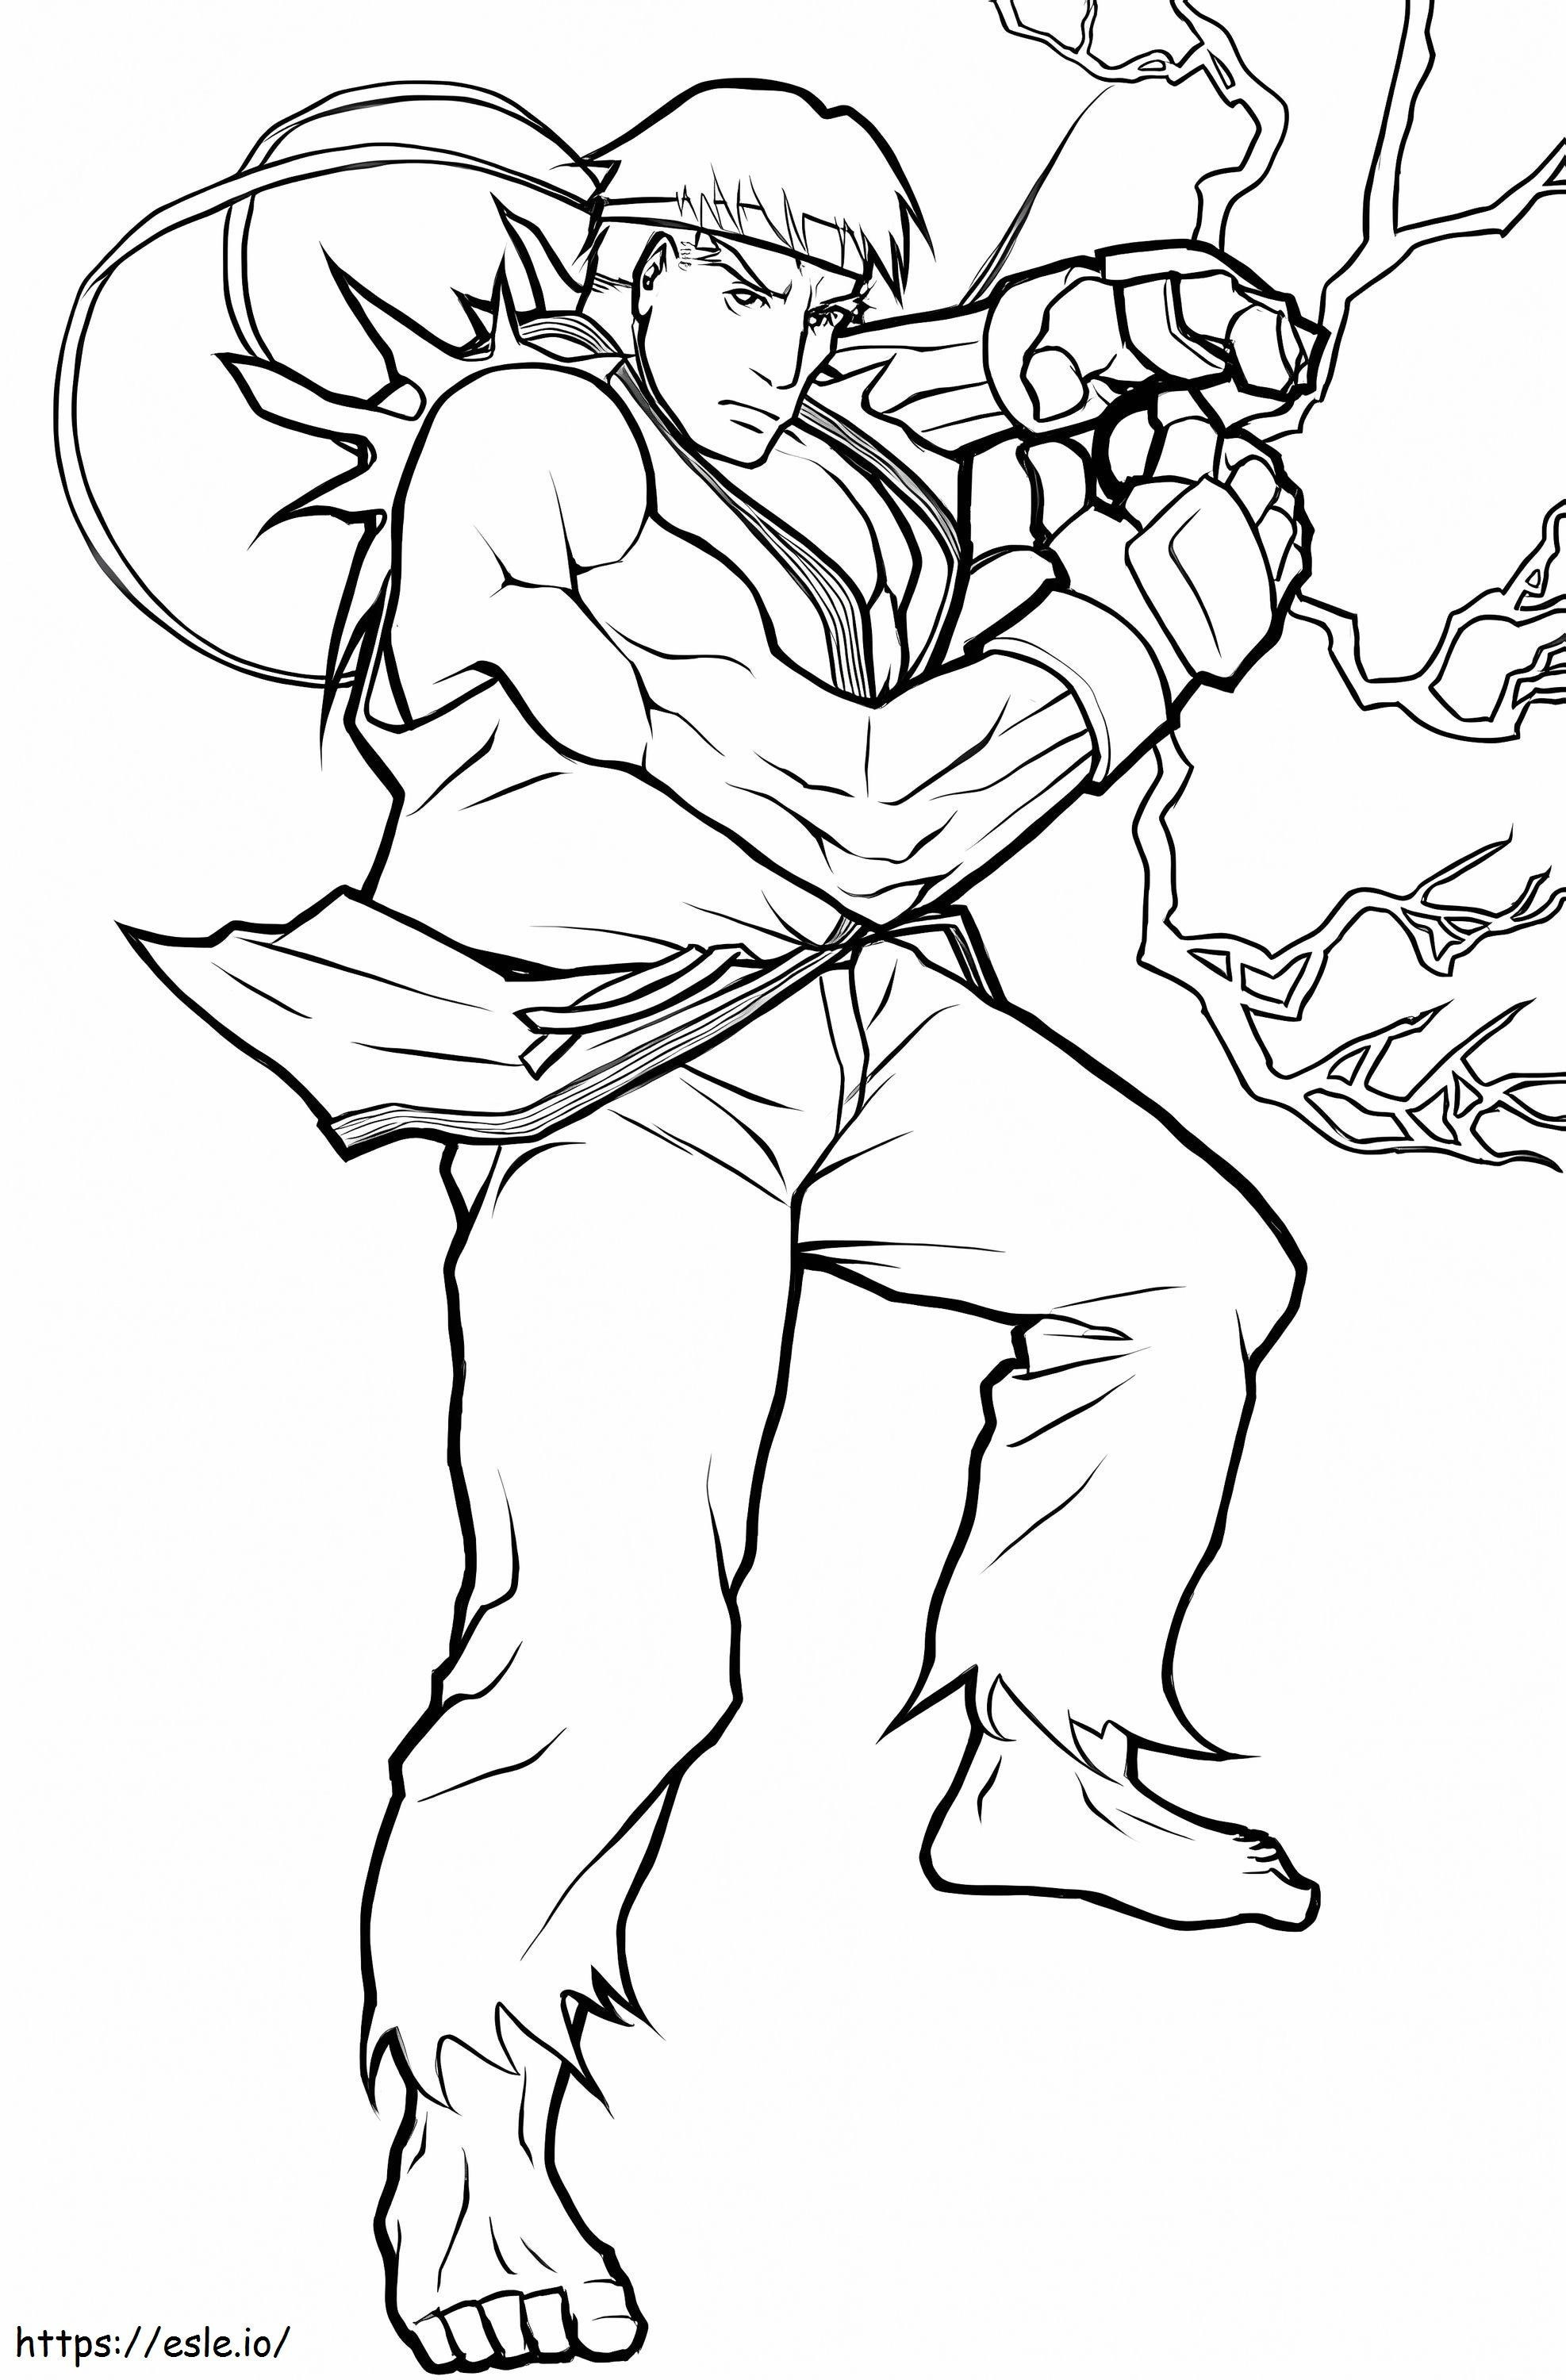 Ryu Poder coloring page